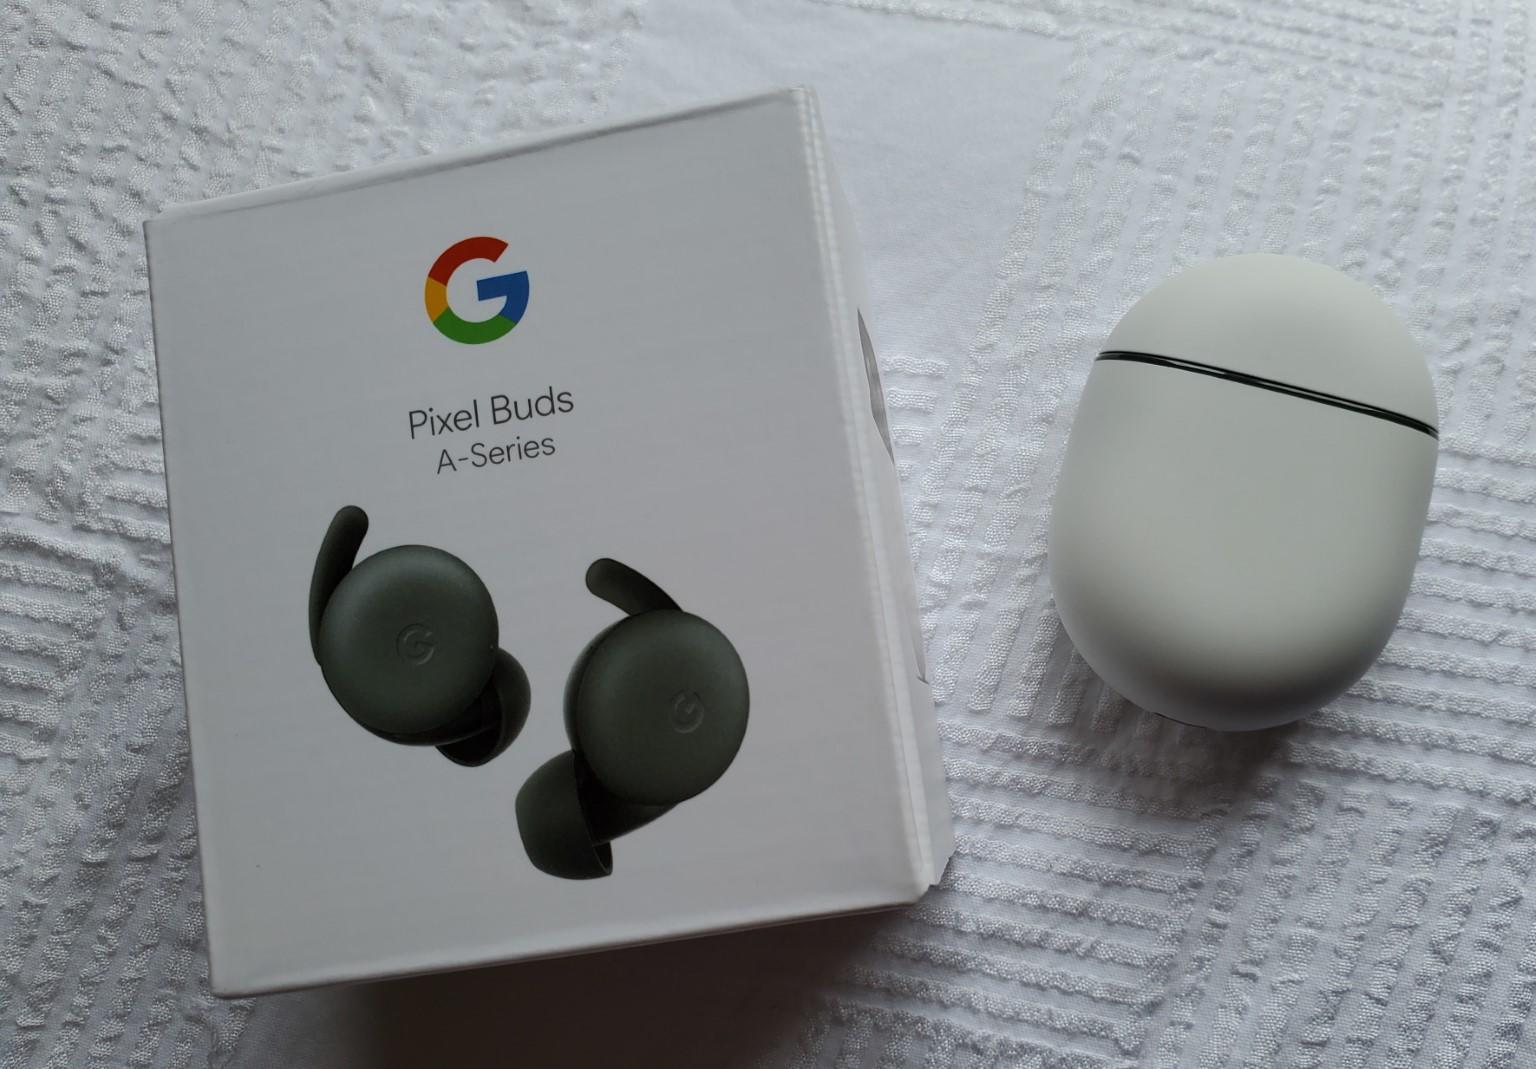 Google Pixel Buds A-Series, how to buy